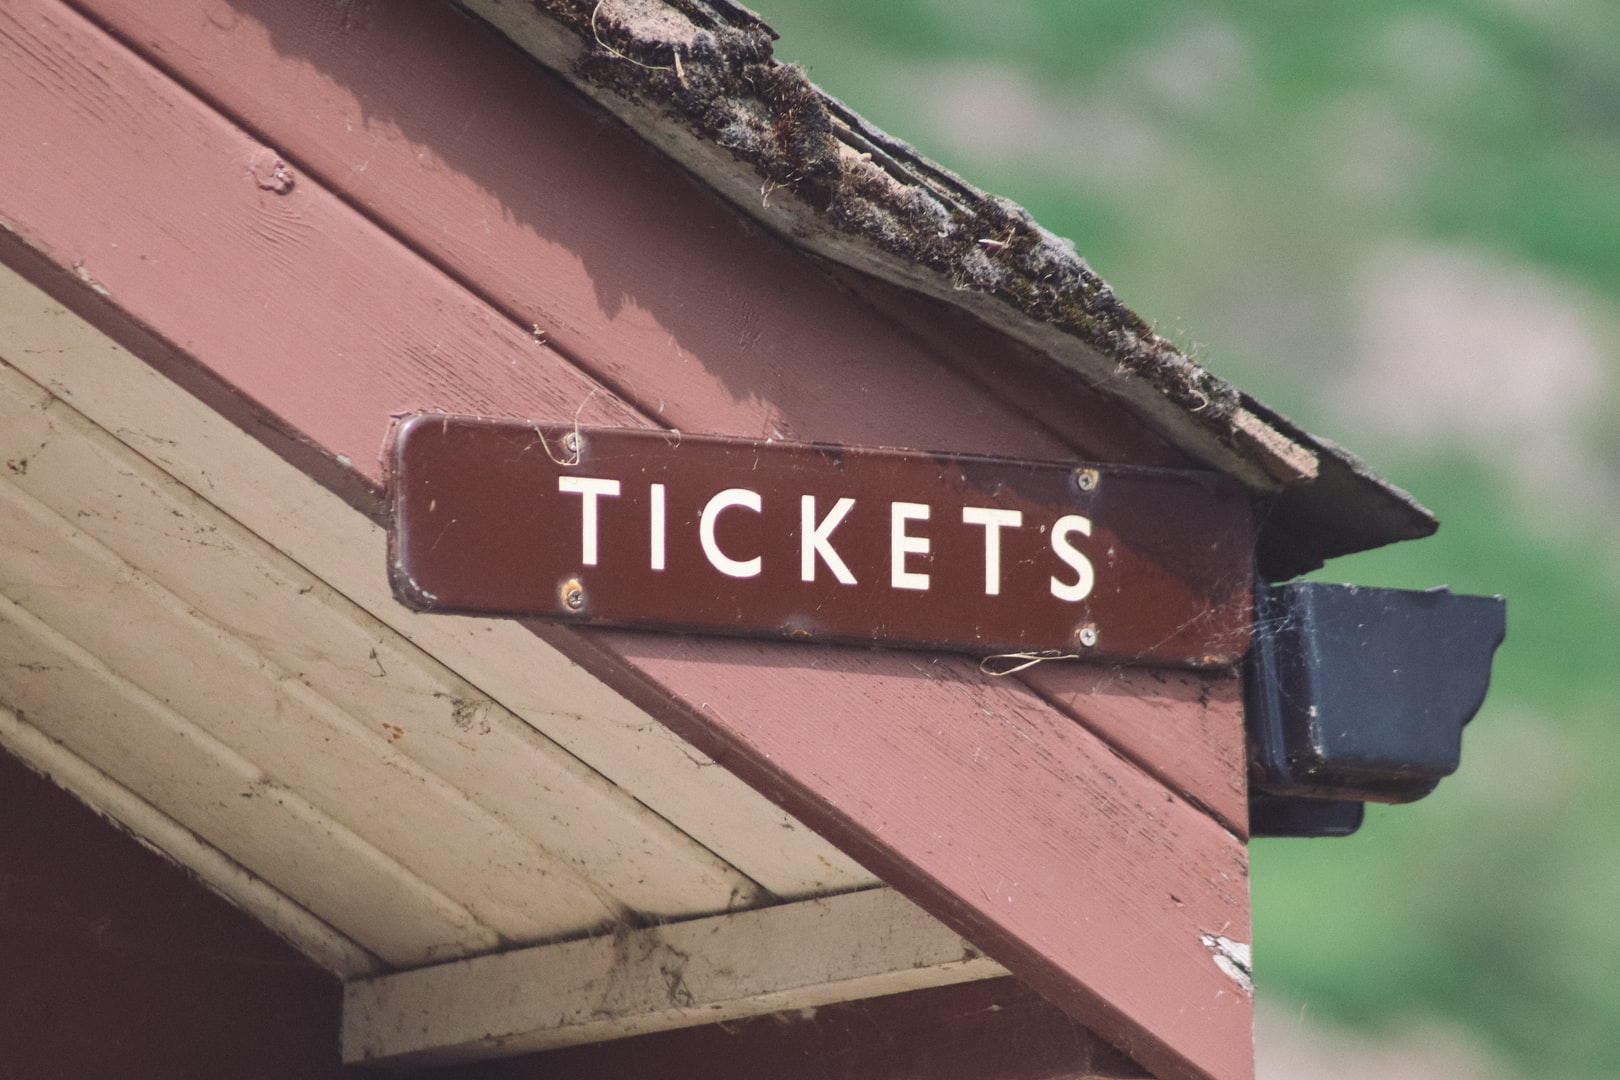 Photo of a wooden ticket sales hut